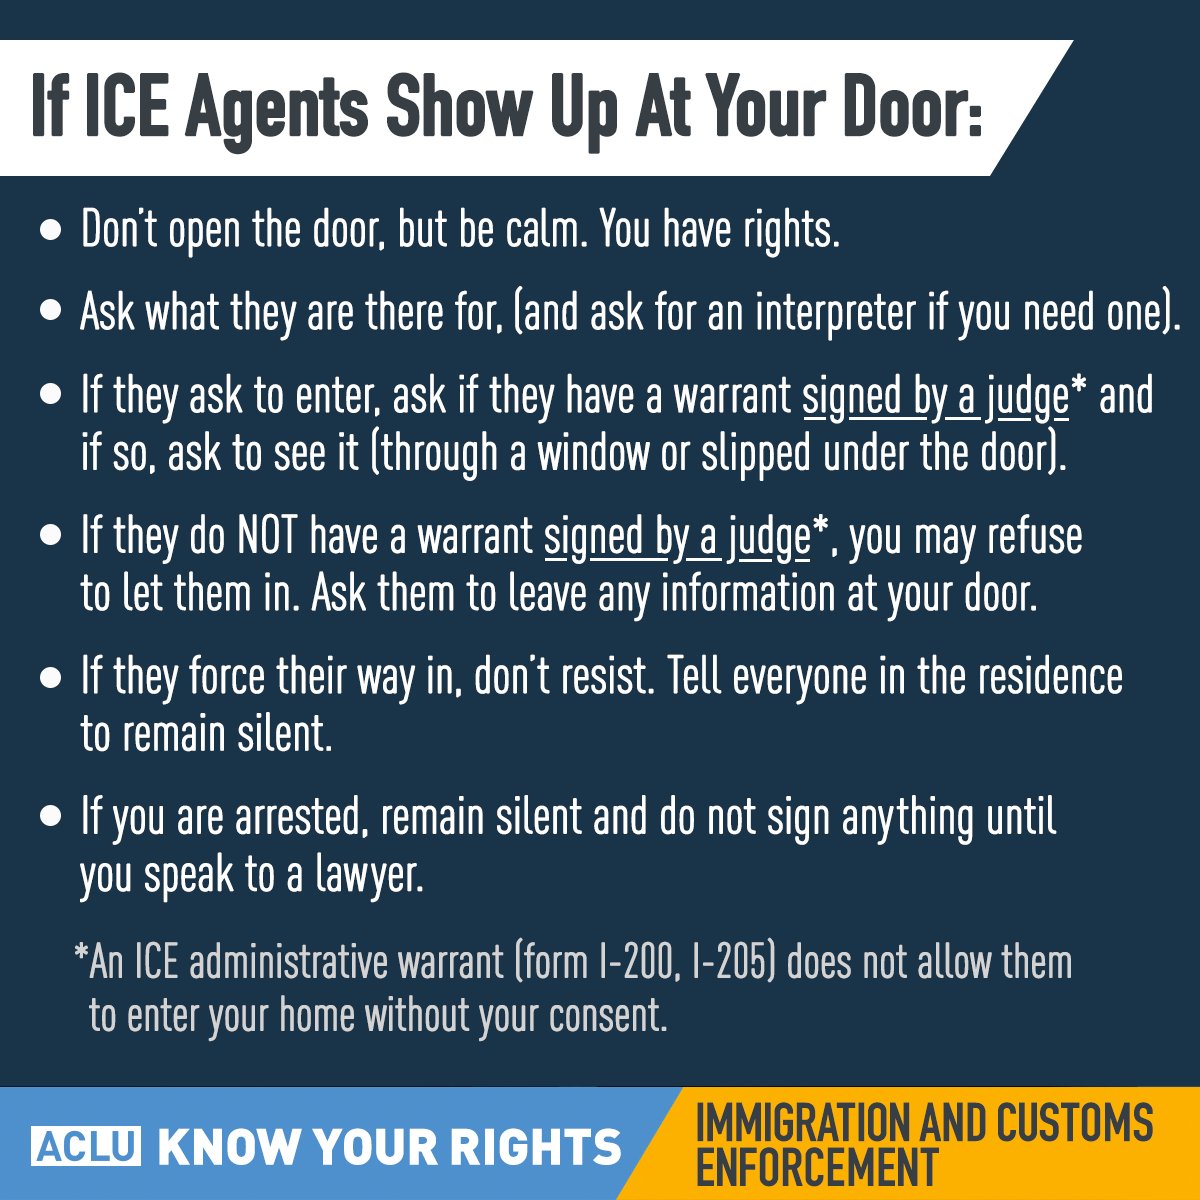 RT @ACLU: KNOW YOUR RIGHTS: What to do if ICE agents show up at your door.  #NoBanNoWallNoRaids https://t.co/HOAF5qtYAs